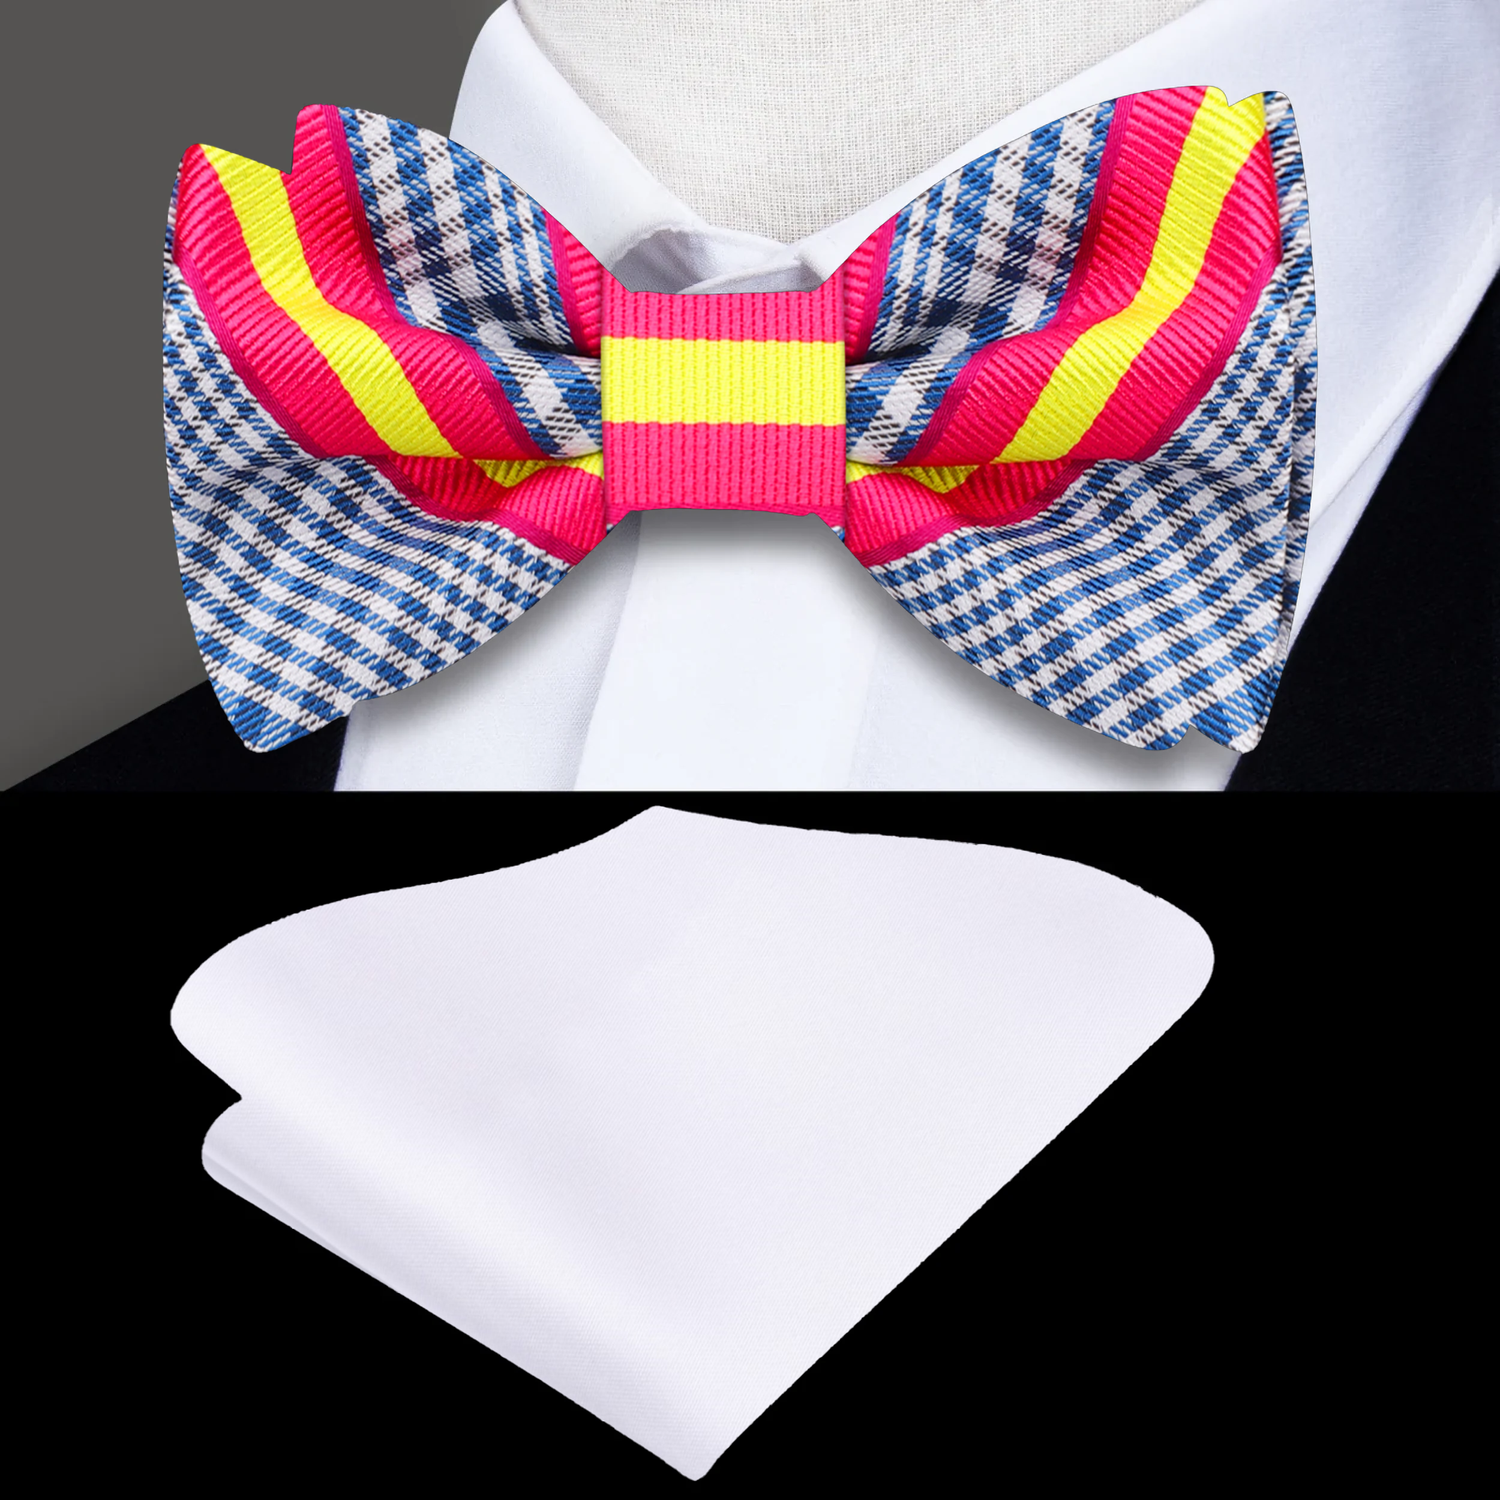 Blue Plaid Pink Yellow Stripe Bow Tie and White Square